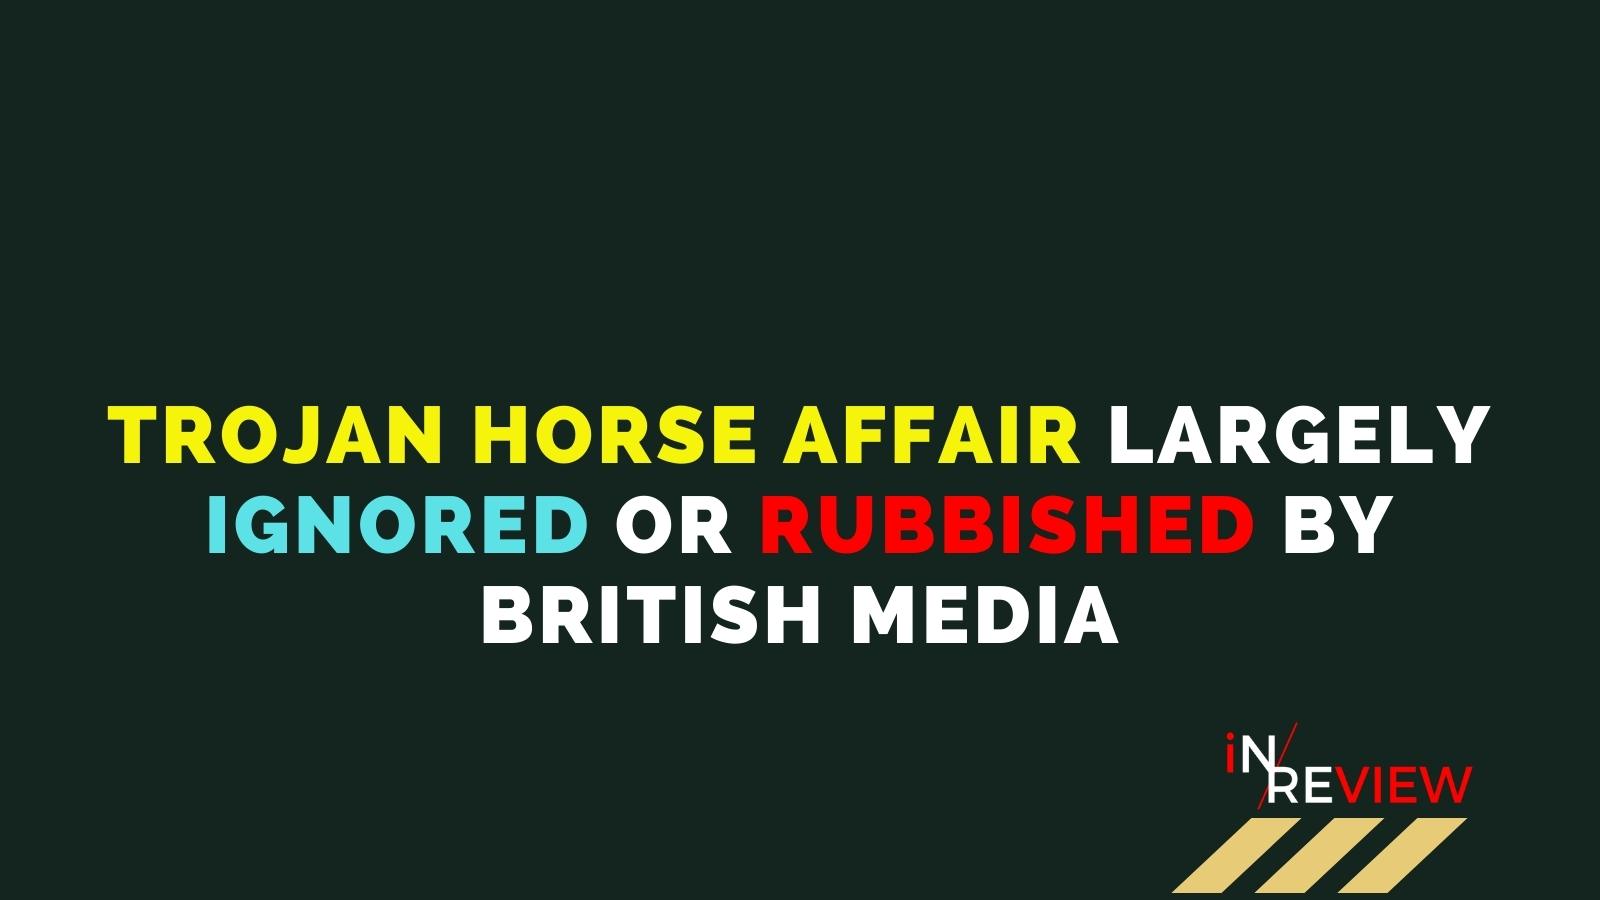 The Trojan Horse Affair: The anger-inducing scandal the British media prefers to ignore